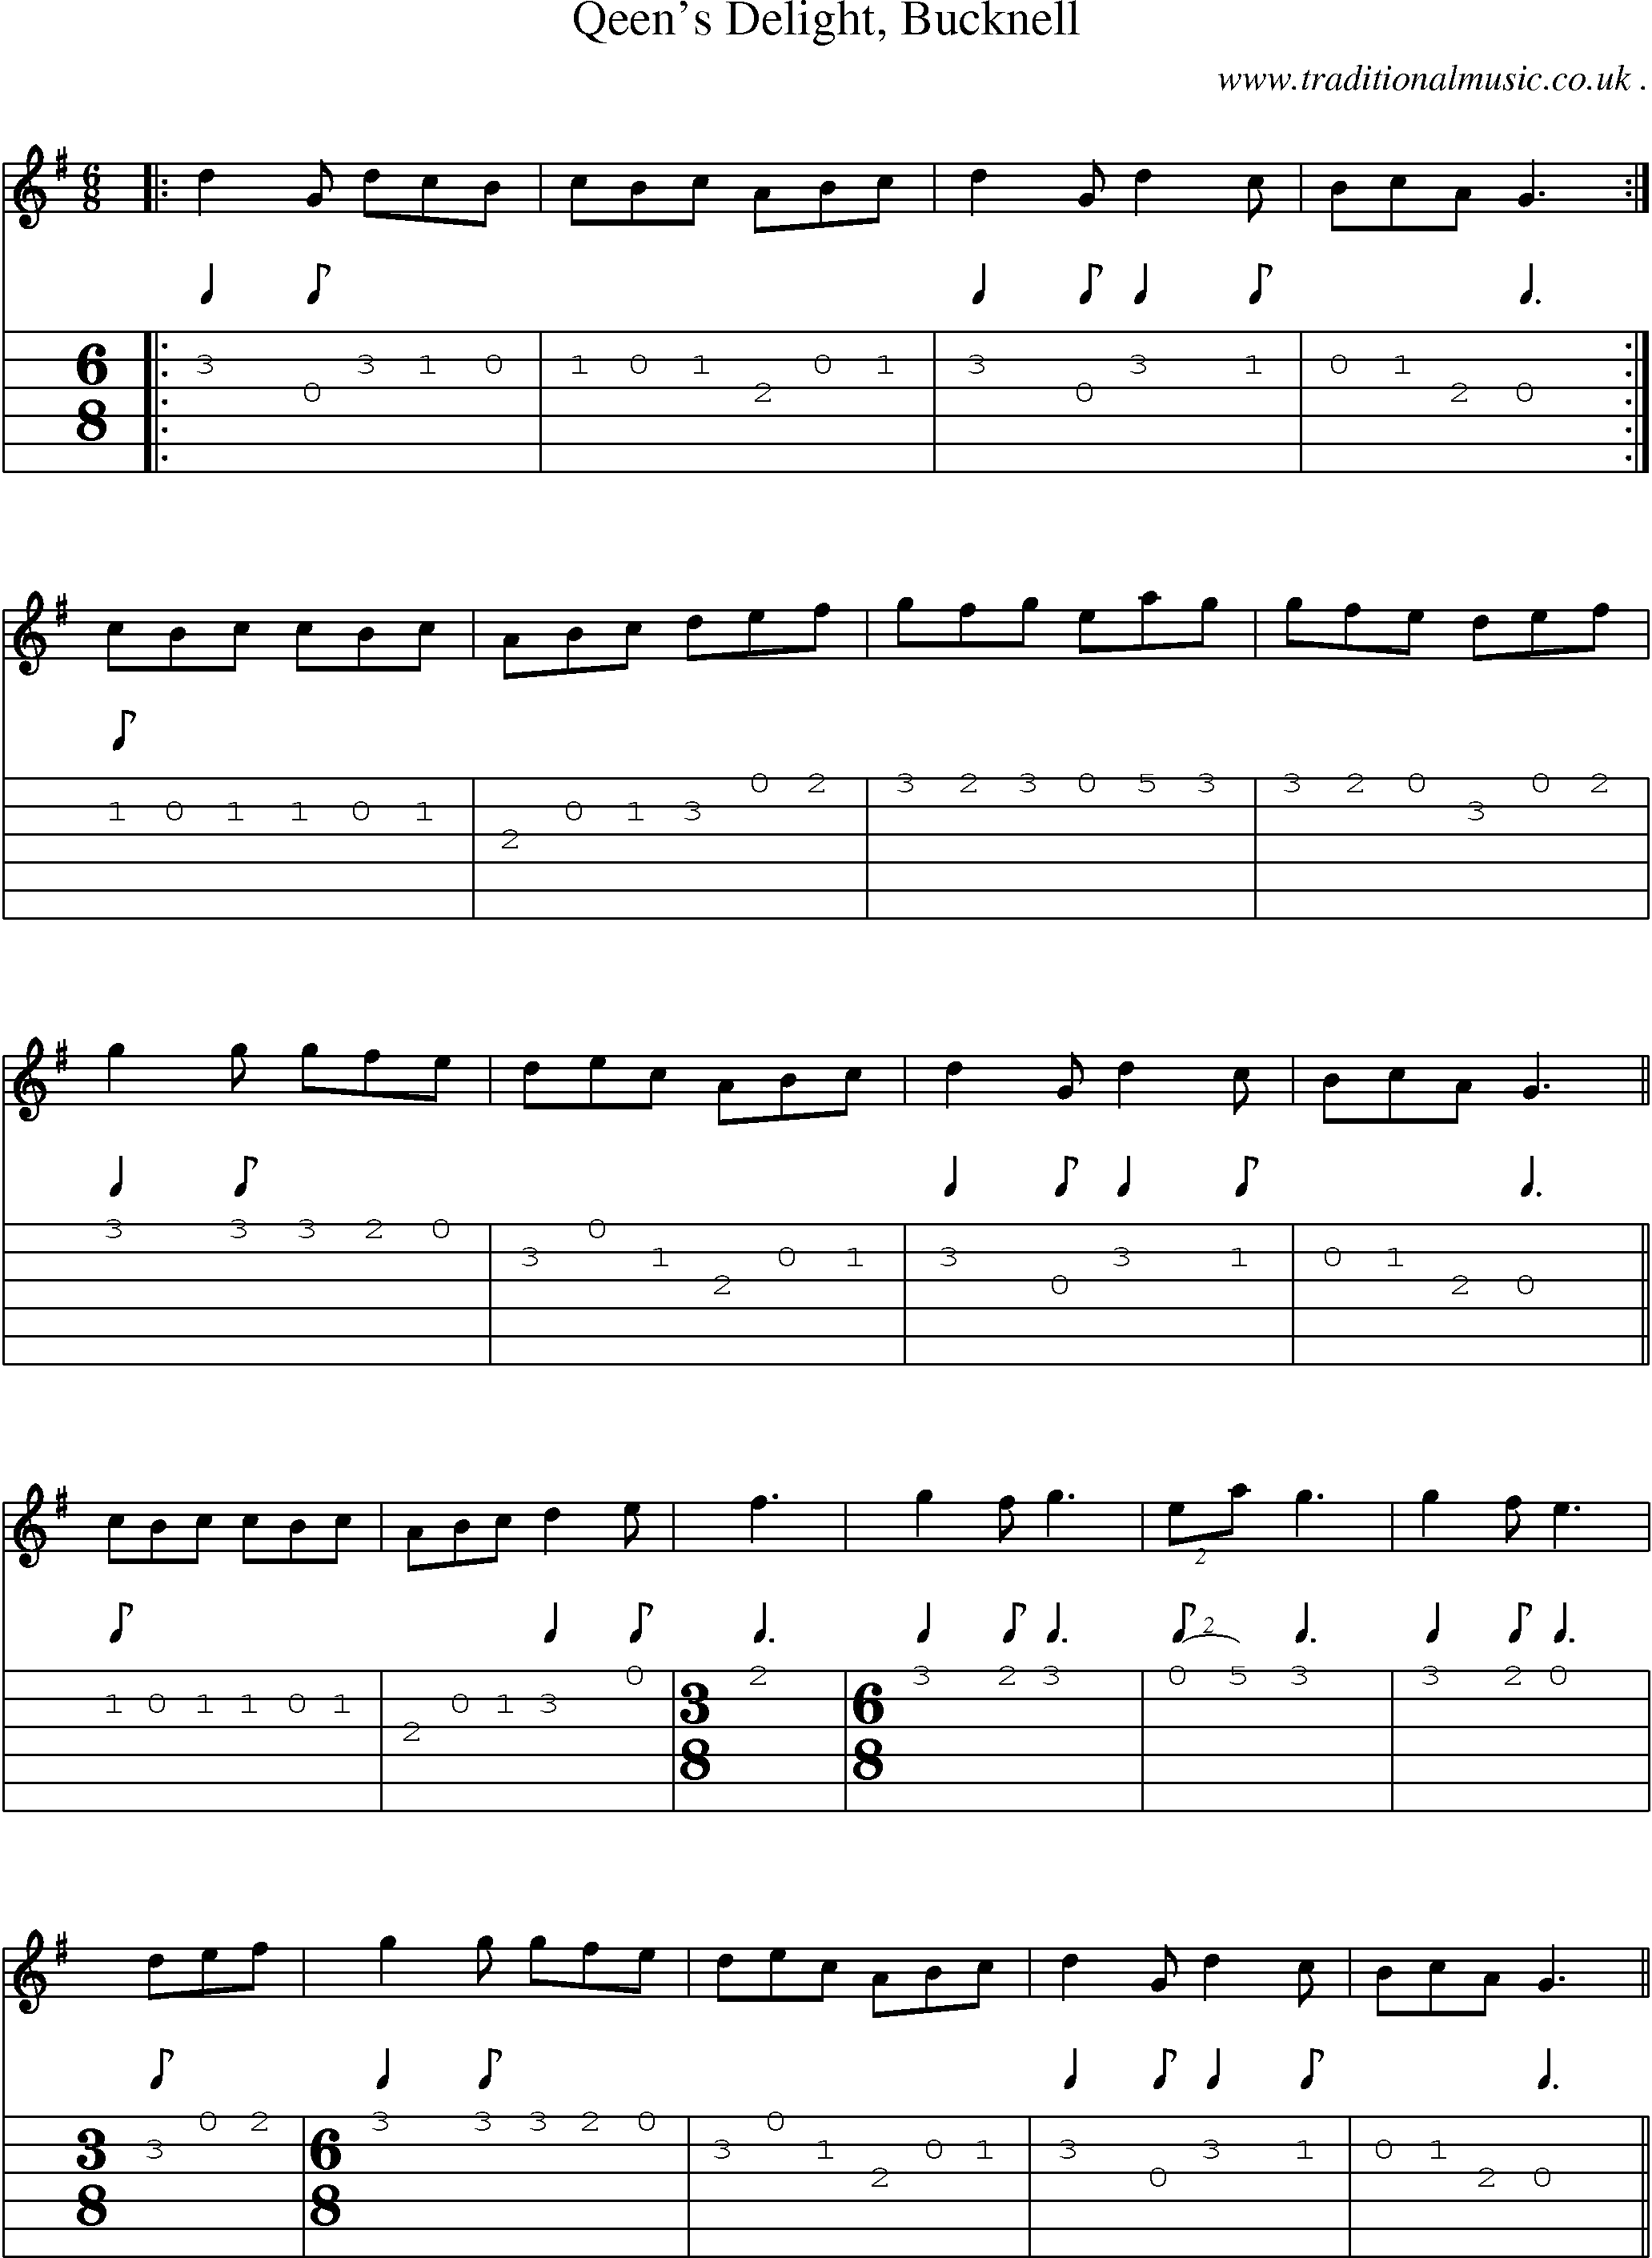 Sheet-Music and Guitar Tabs for Qeens Delight Bucknell